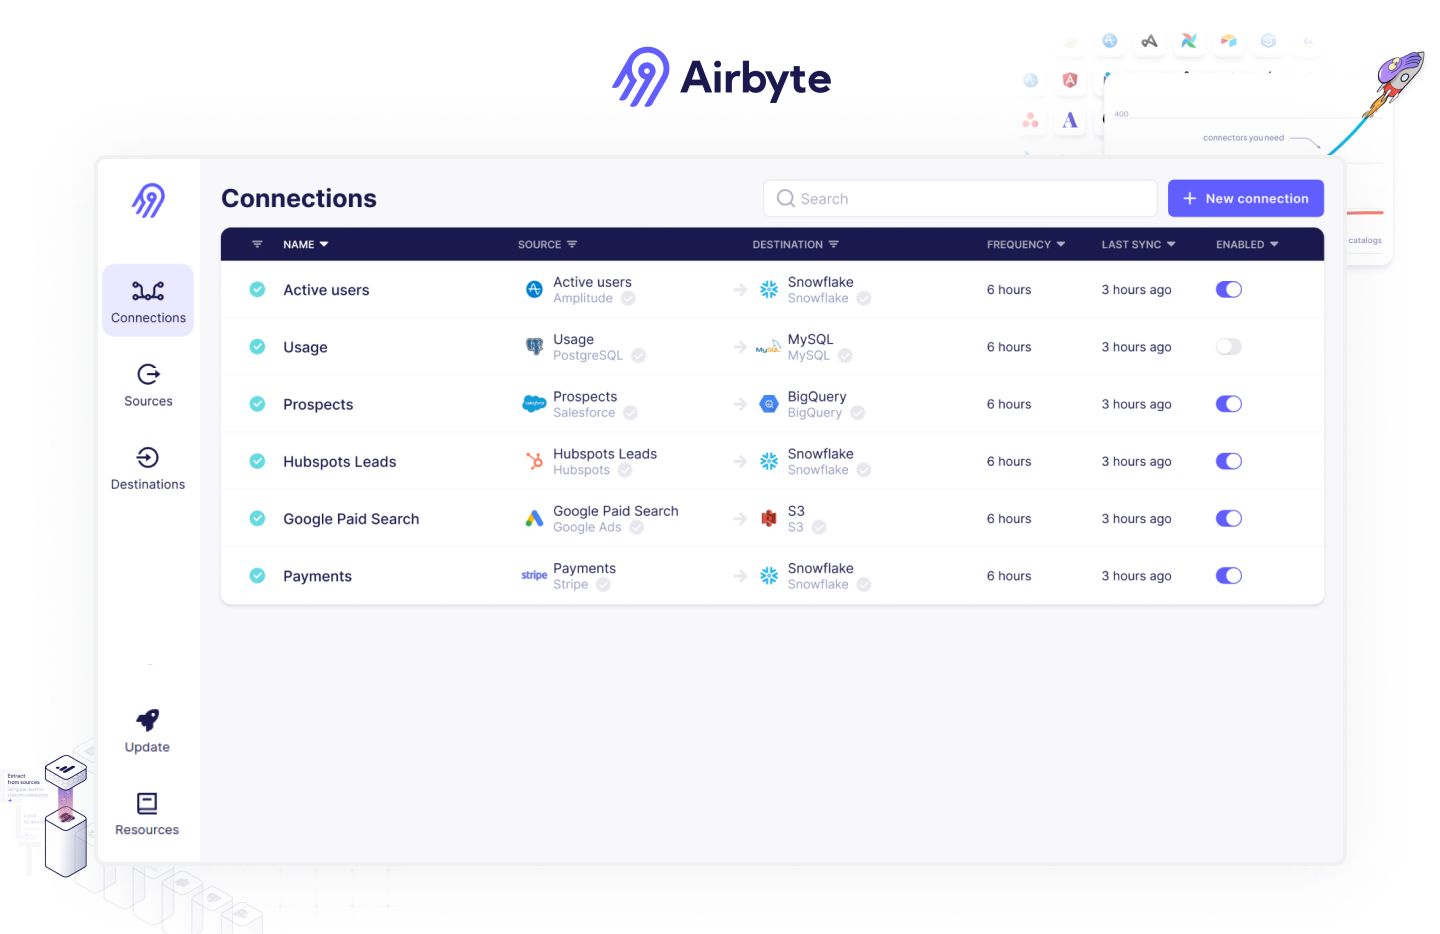 Airbyte's interface